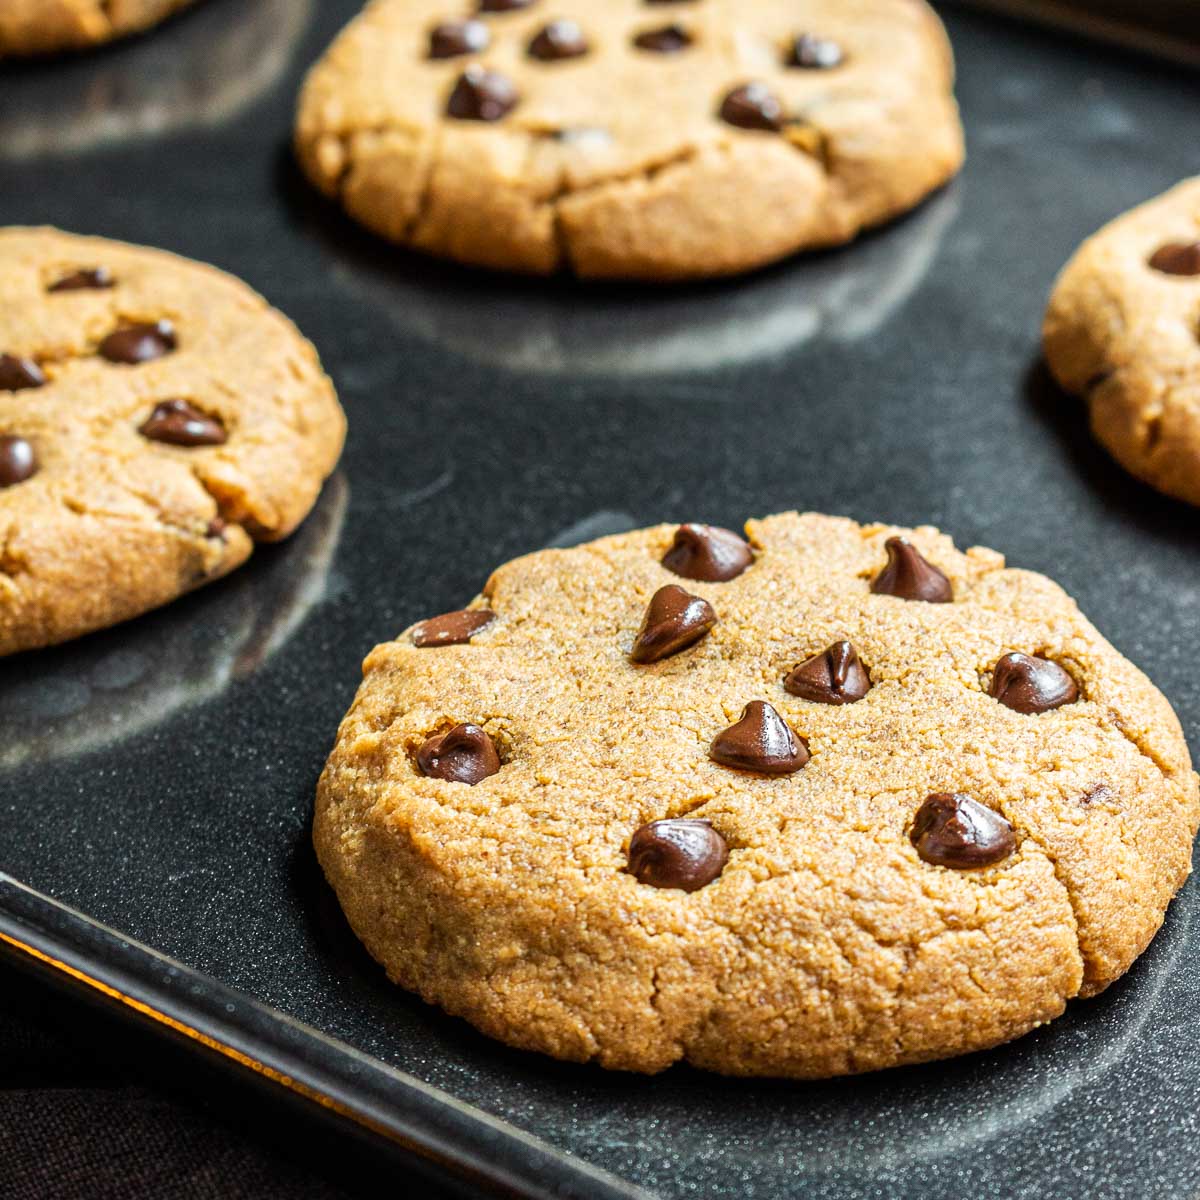 Keto Peanut Butter Cookies with Chocolate Chips on a black sheet pan